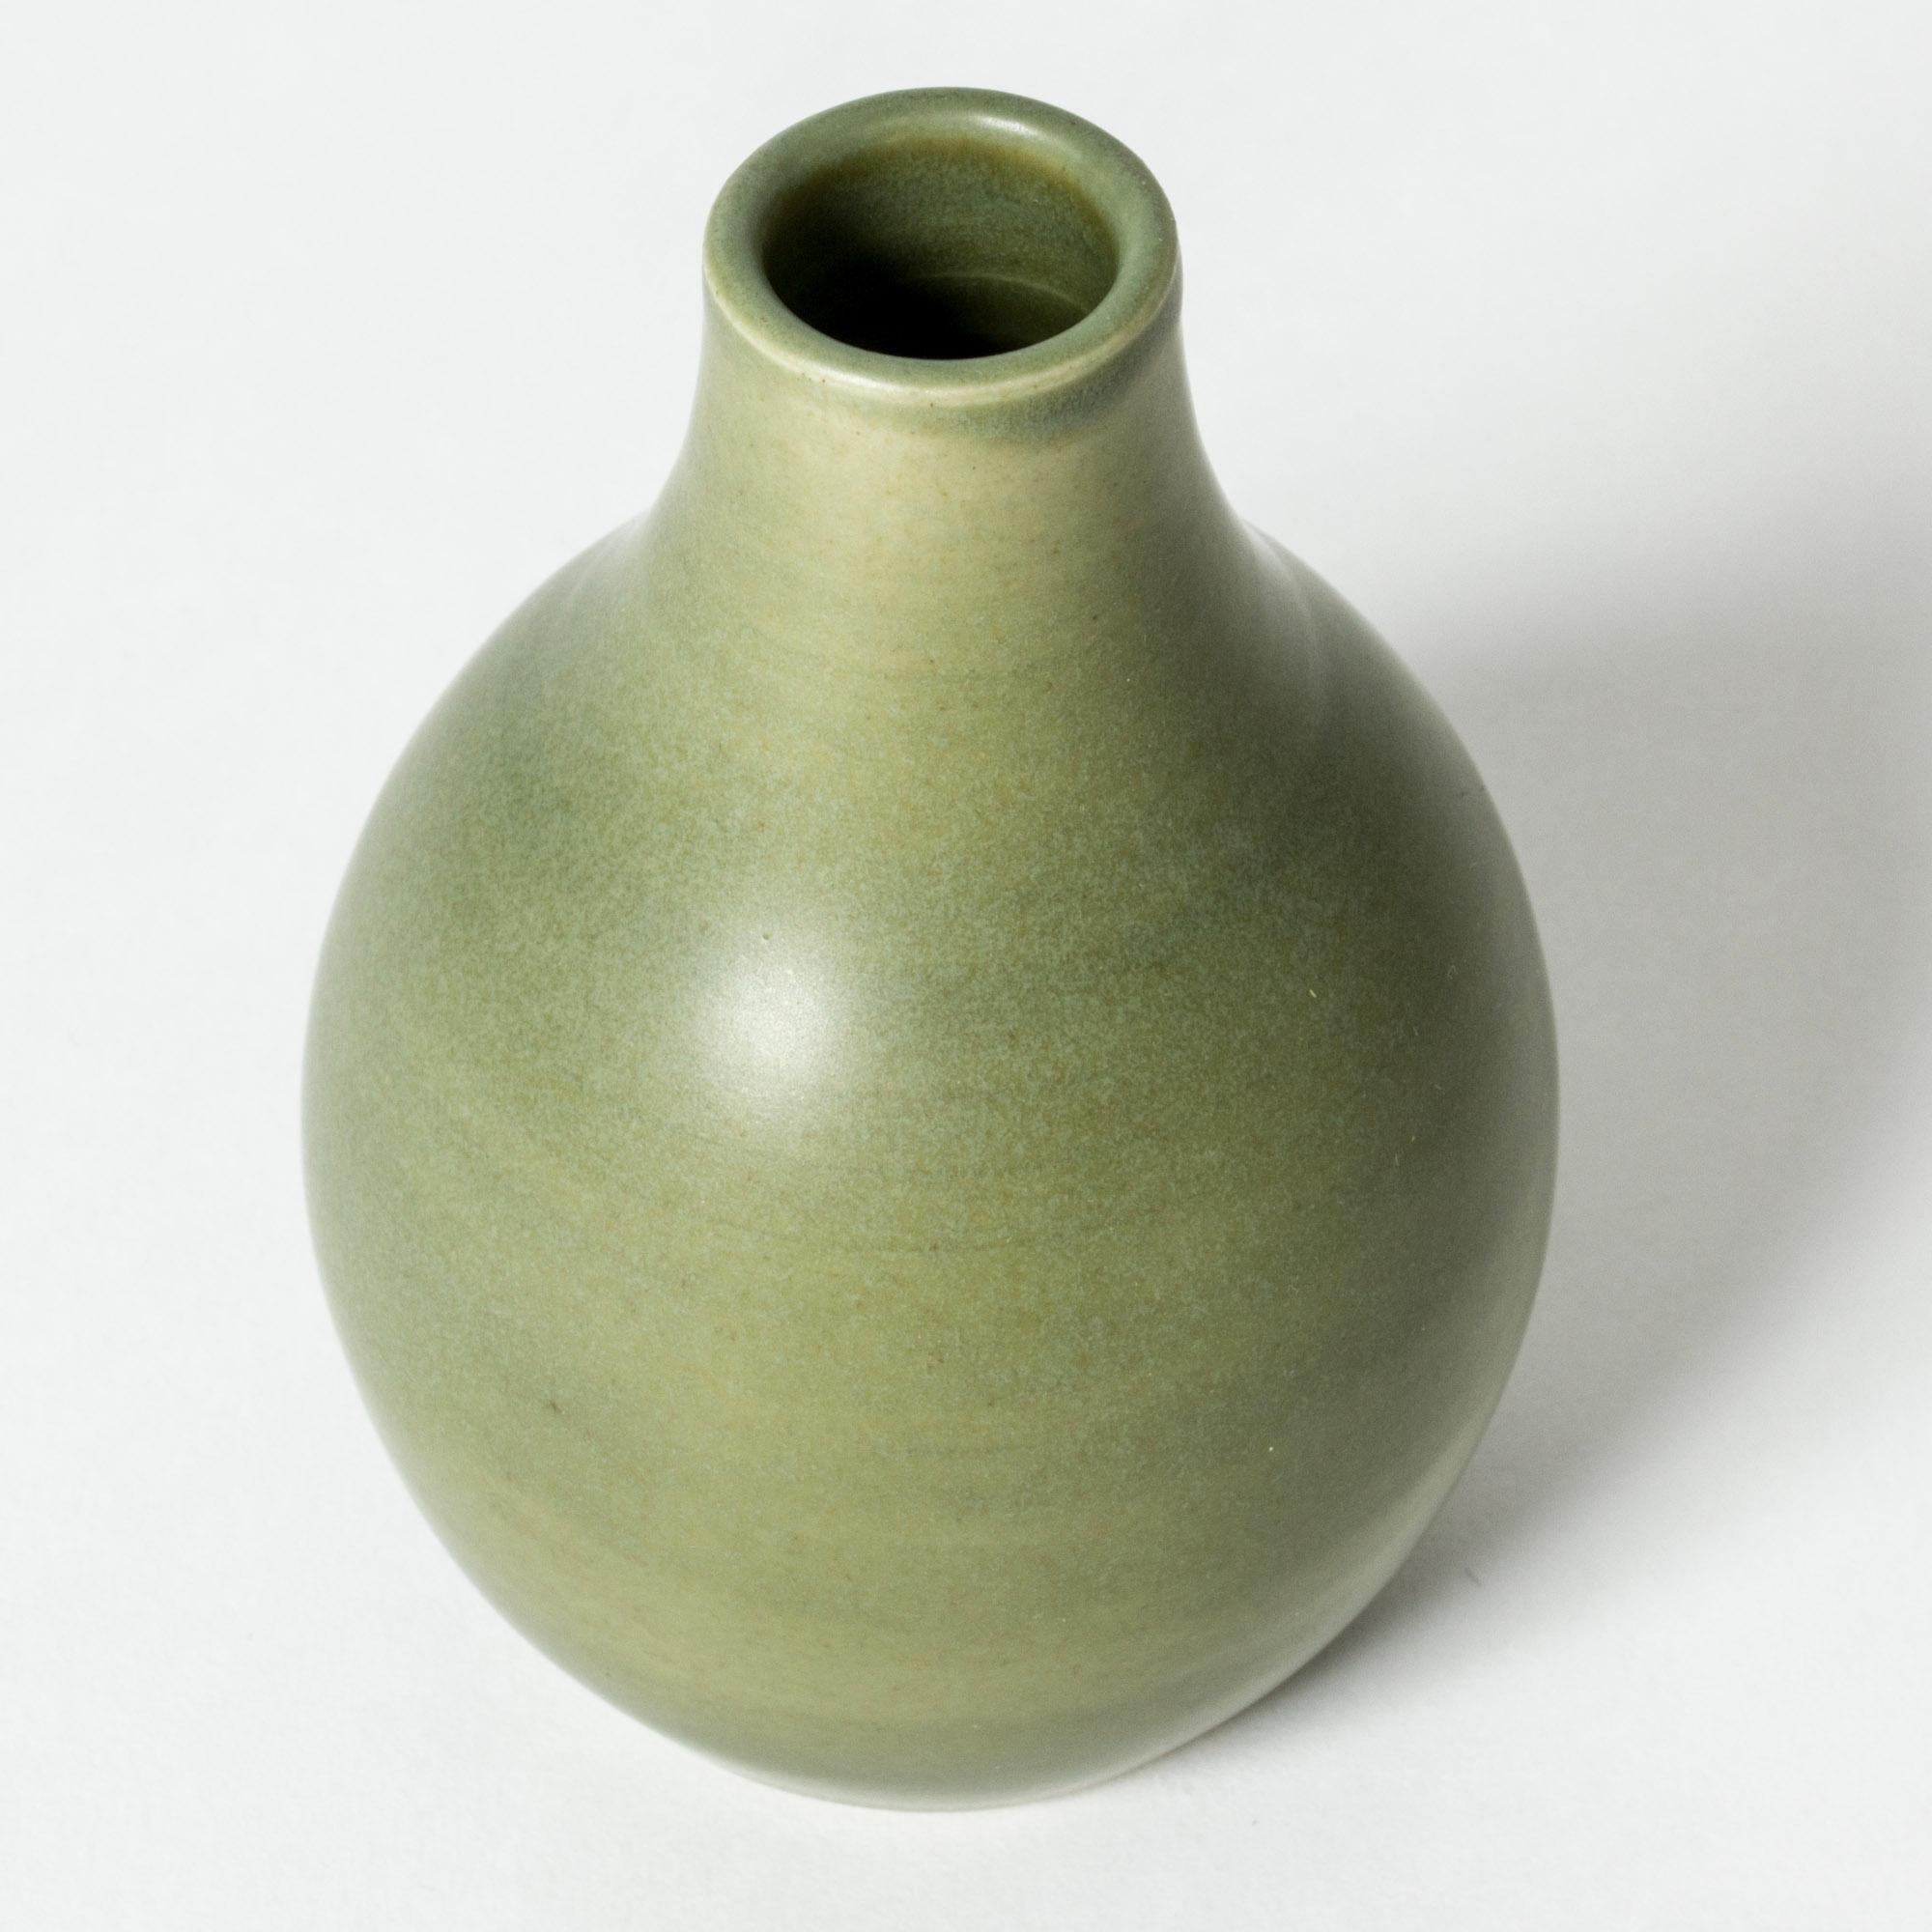 Beautiful stoneware vase by Eric and Ingrid Triller, in an appealing, streamlined shape. Smooth, moss green glaze.

Fleeing World War II, German potters Eric and Ingrid Triller settled in the industrial village Tobo and started making their Bauhaus